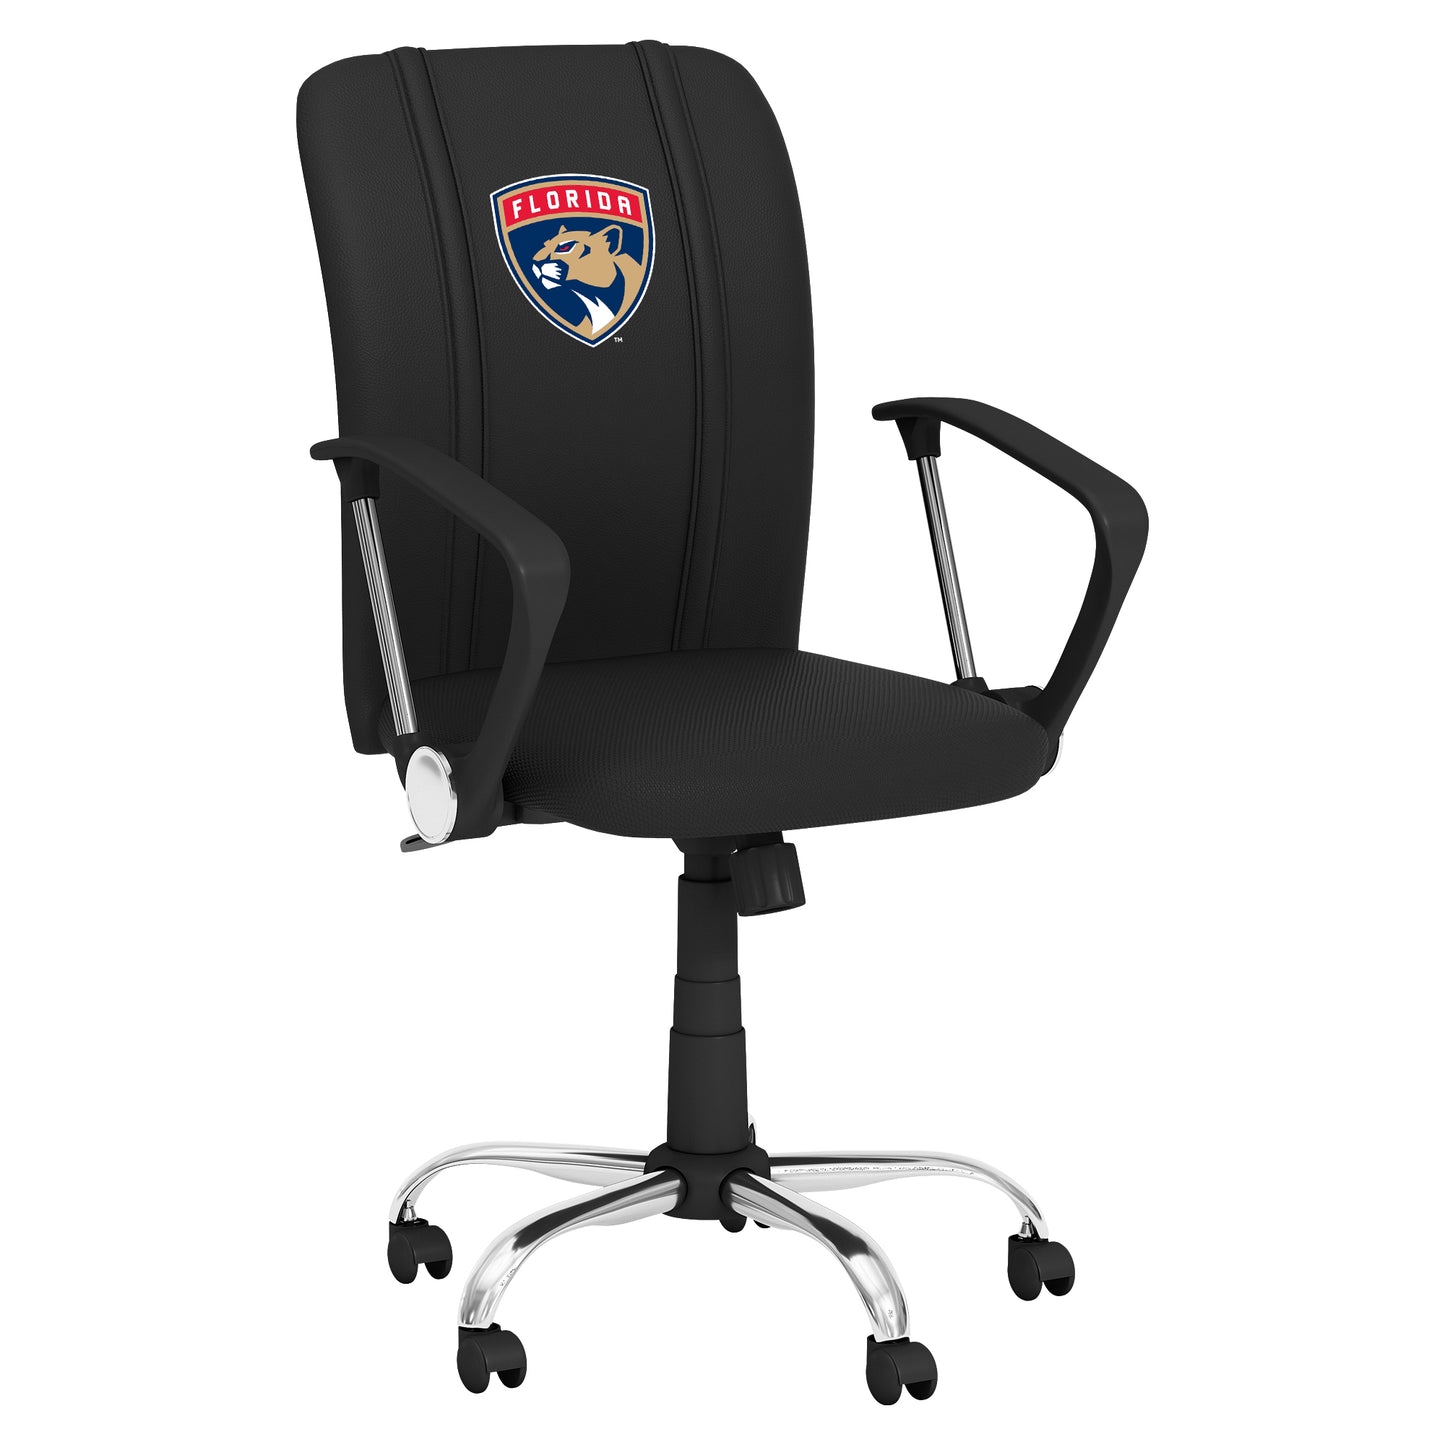 Curve Task Chair with Florida Panthers Logo